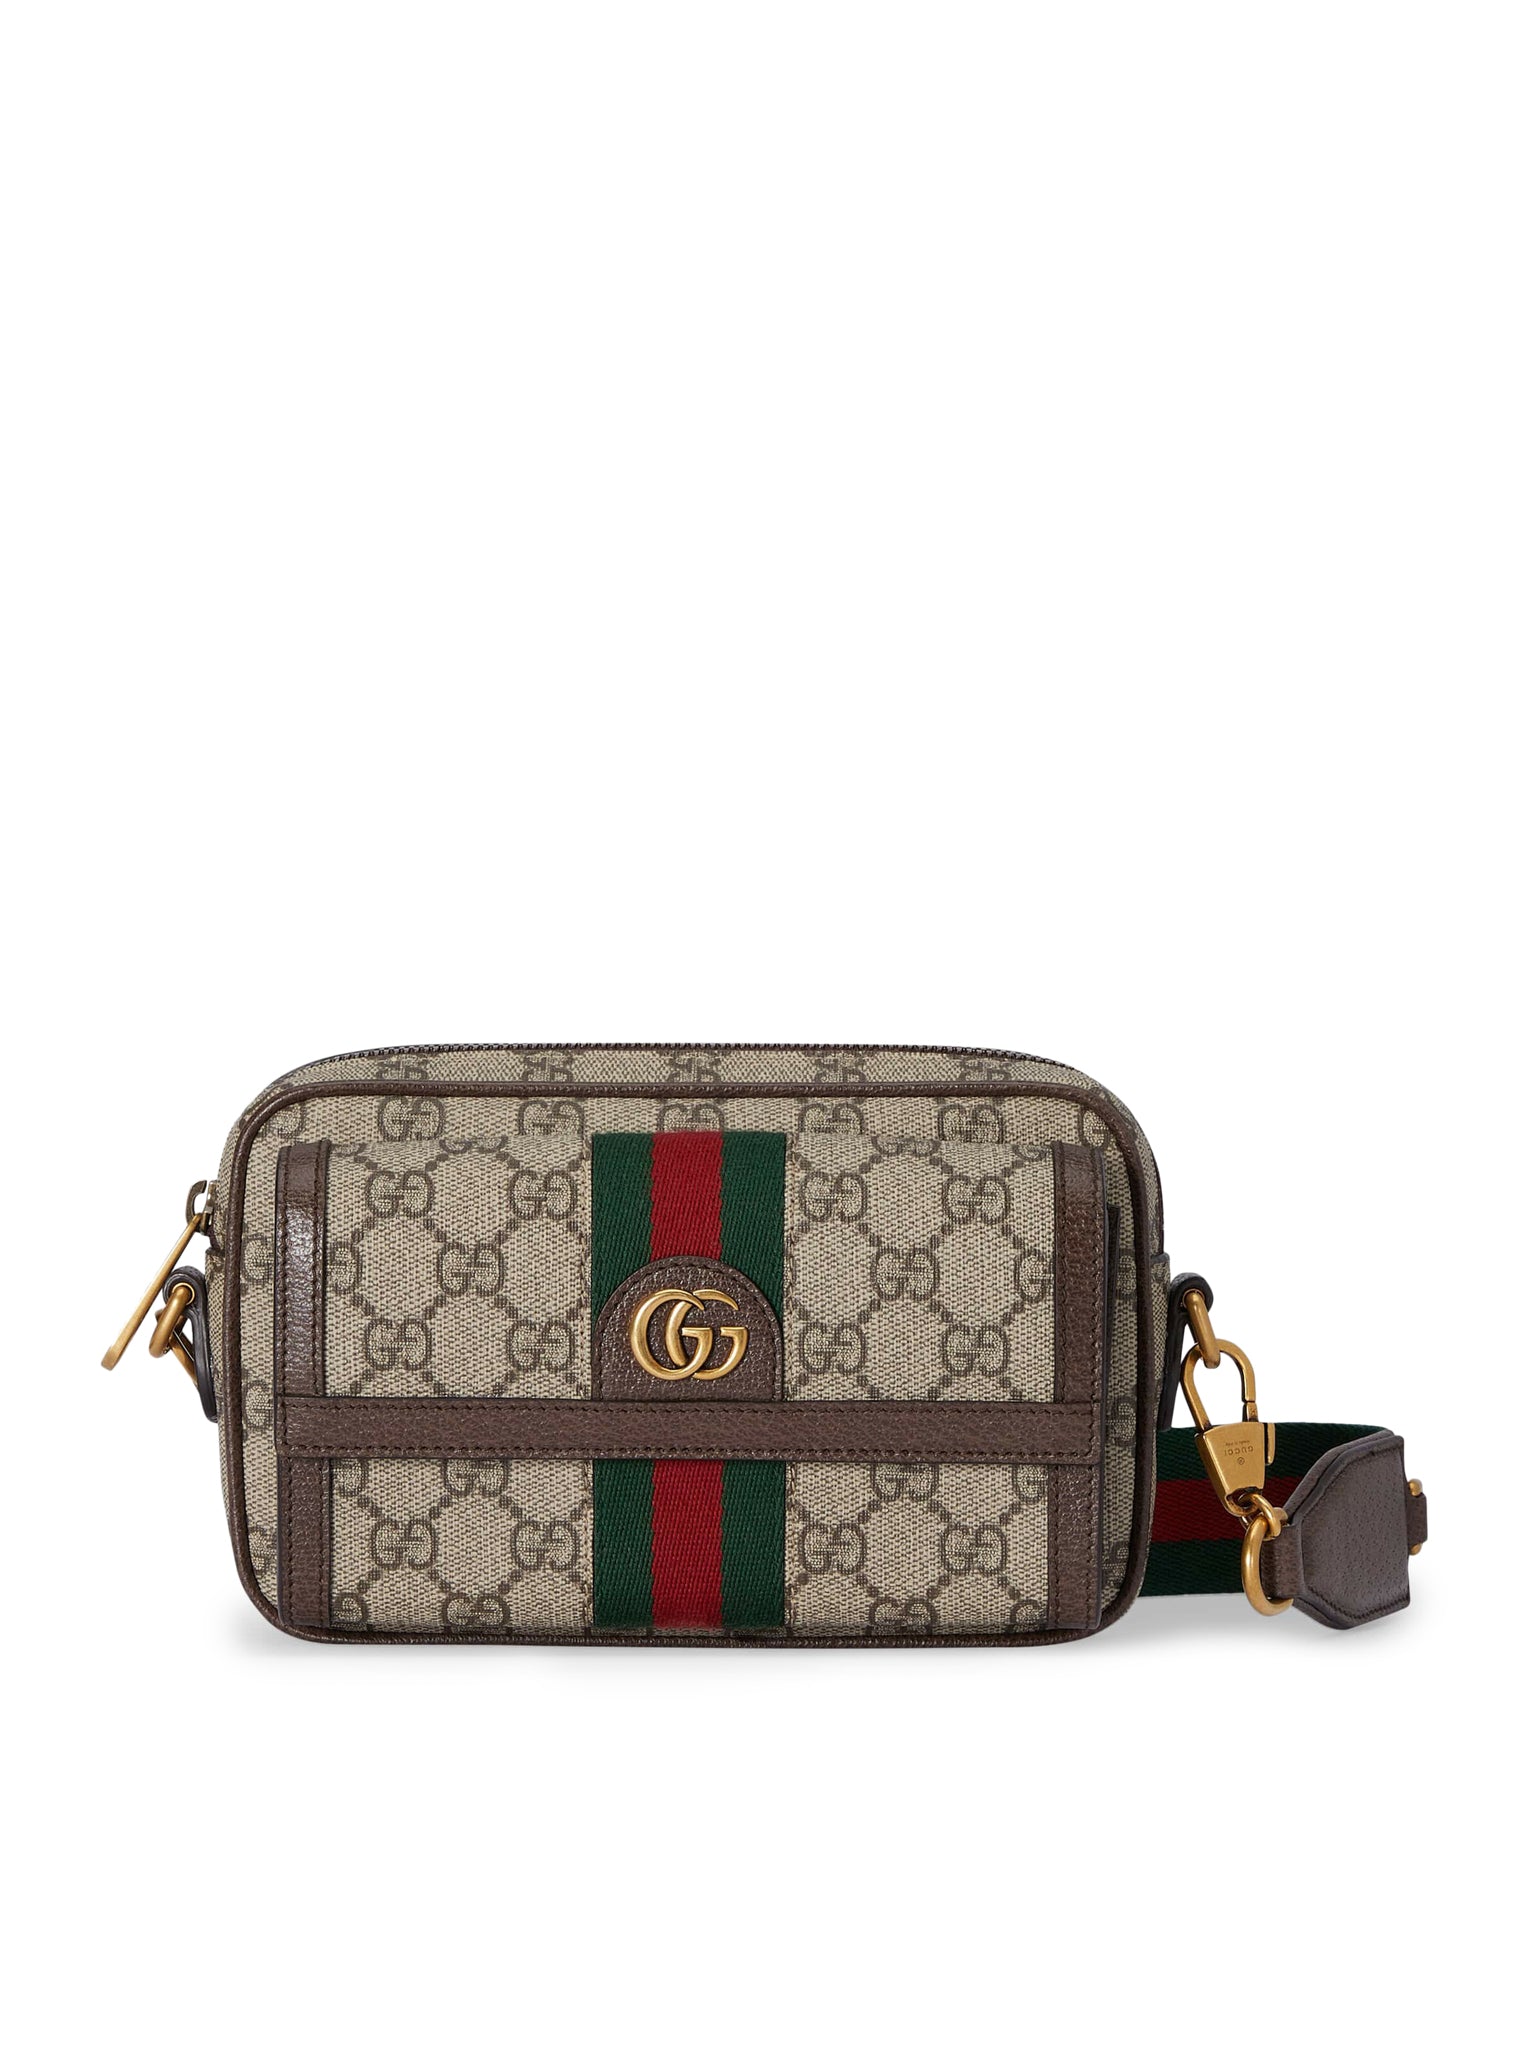 GUCCI Ophidia Mini Shoulder Bag With Gg Motif